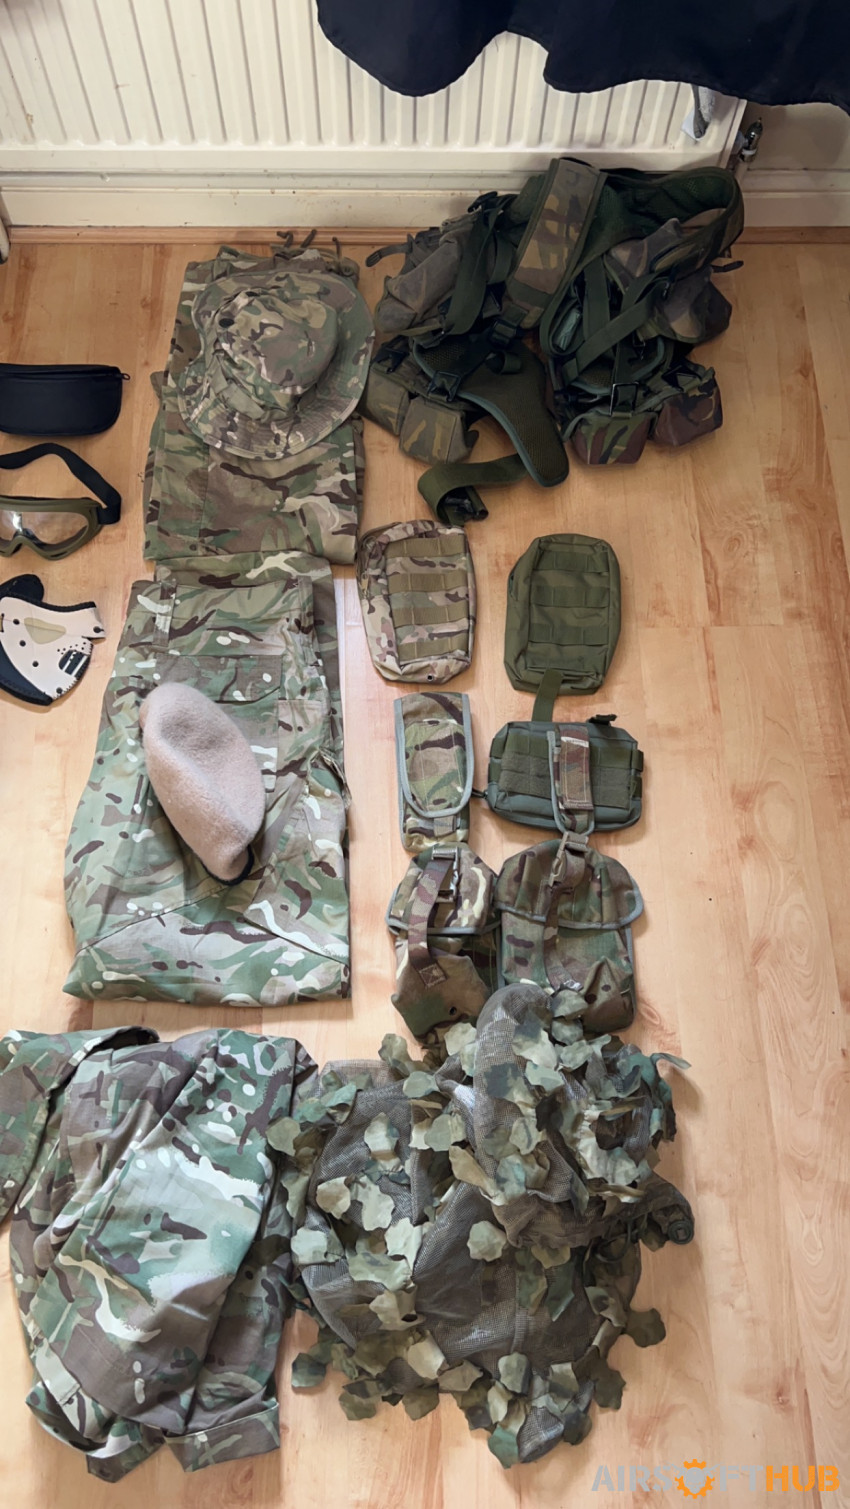 Clutter - Used airsoft equipment